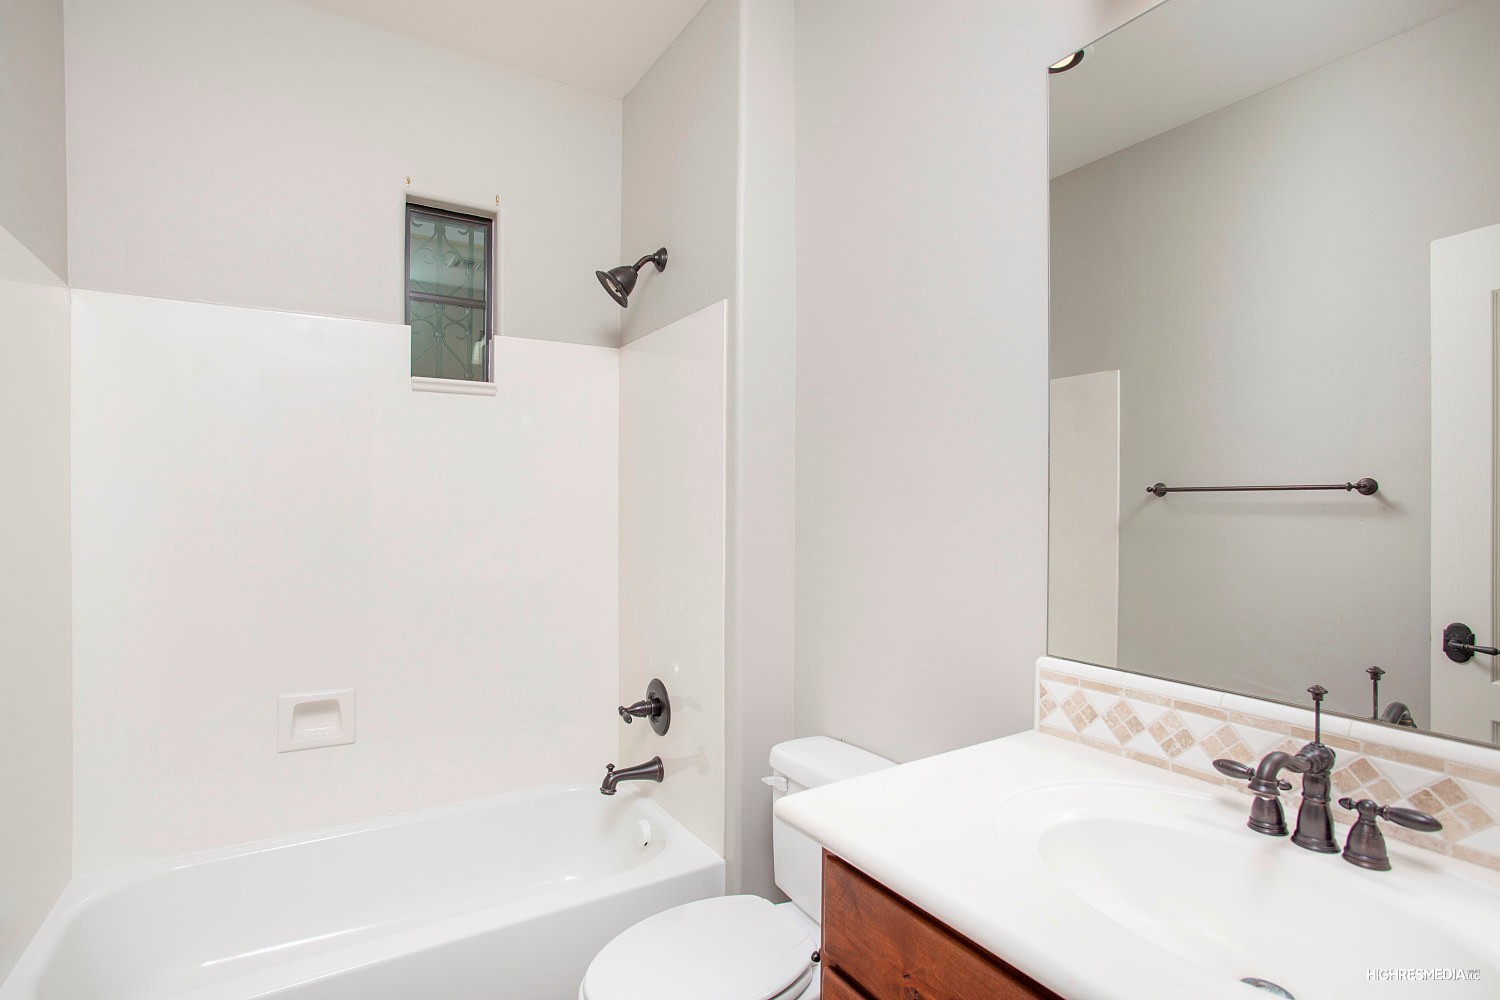 Bright full guest bath at this Scottsdale townhome for sale in Market Street at DC Ranch located at 20704 N 90th Pl #1005 Scottsdale, AZ 85255 listed by Don Matheson at The Matheson Team